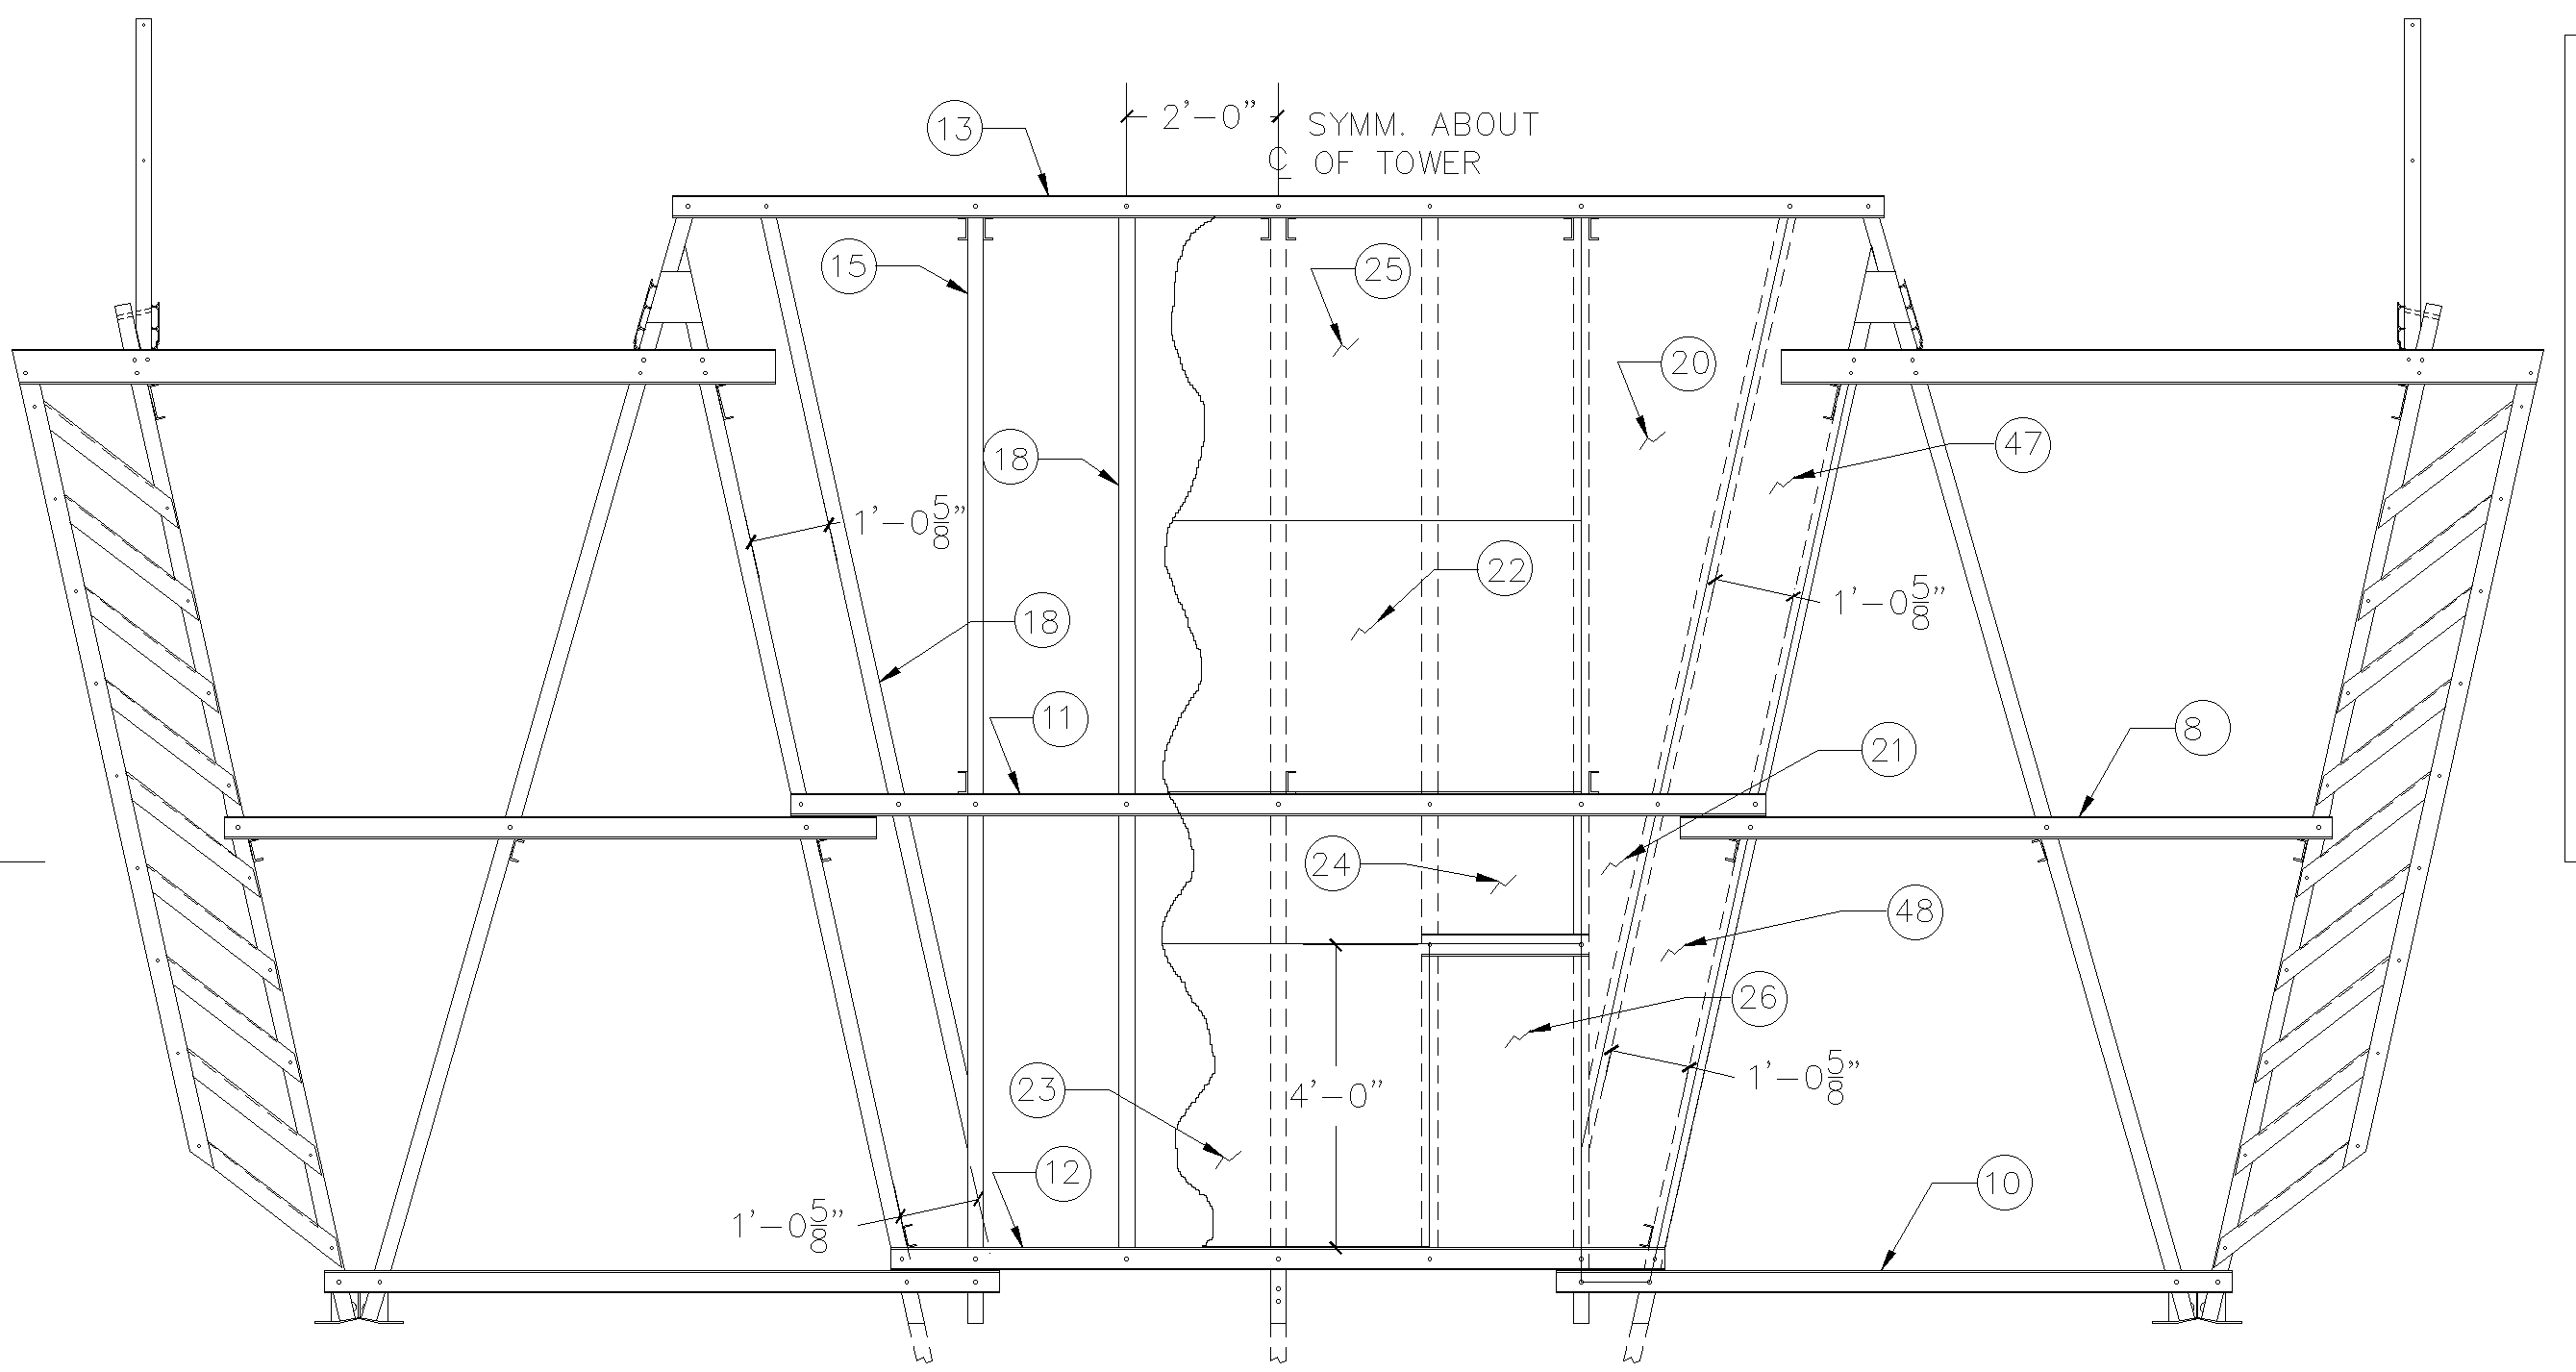 A drawing of the front section of an airplane.